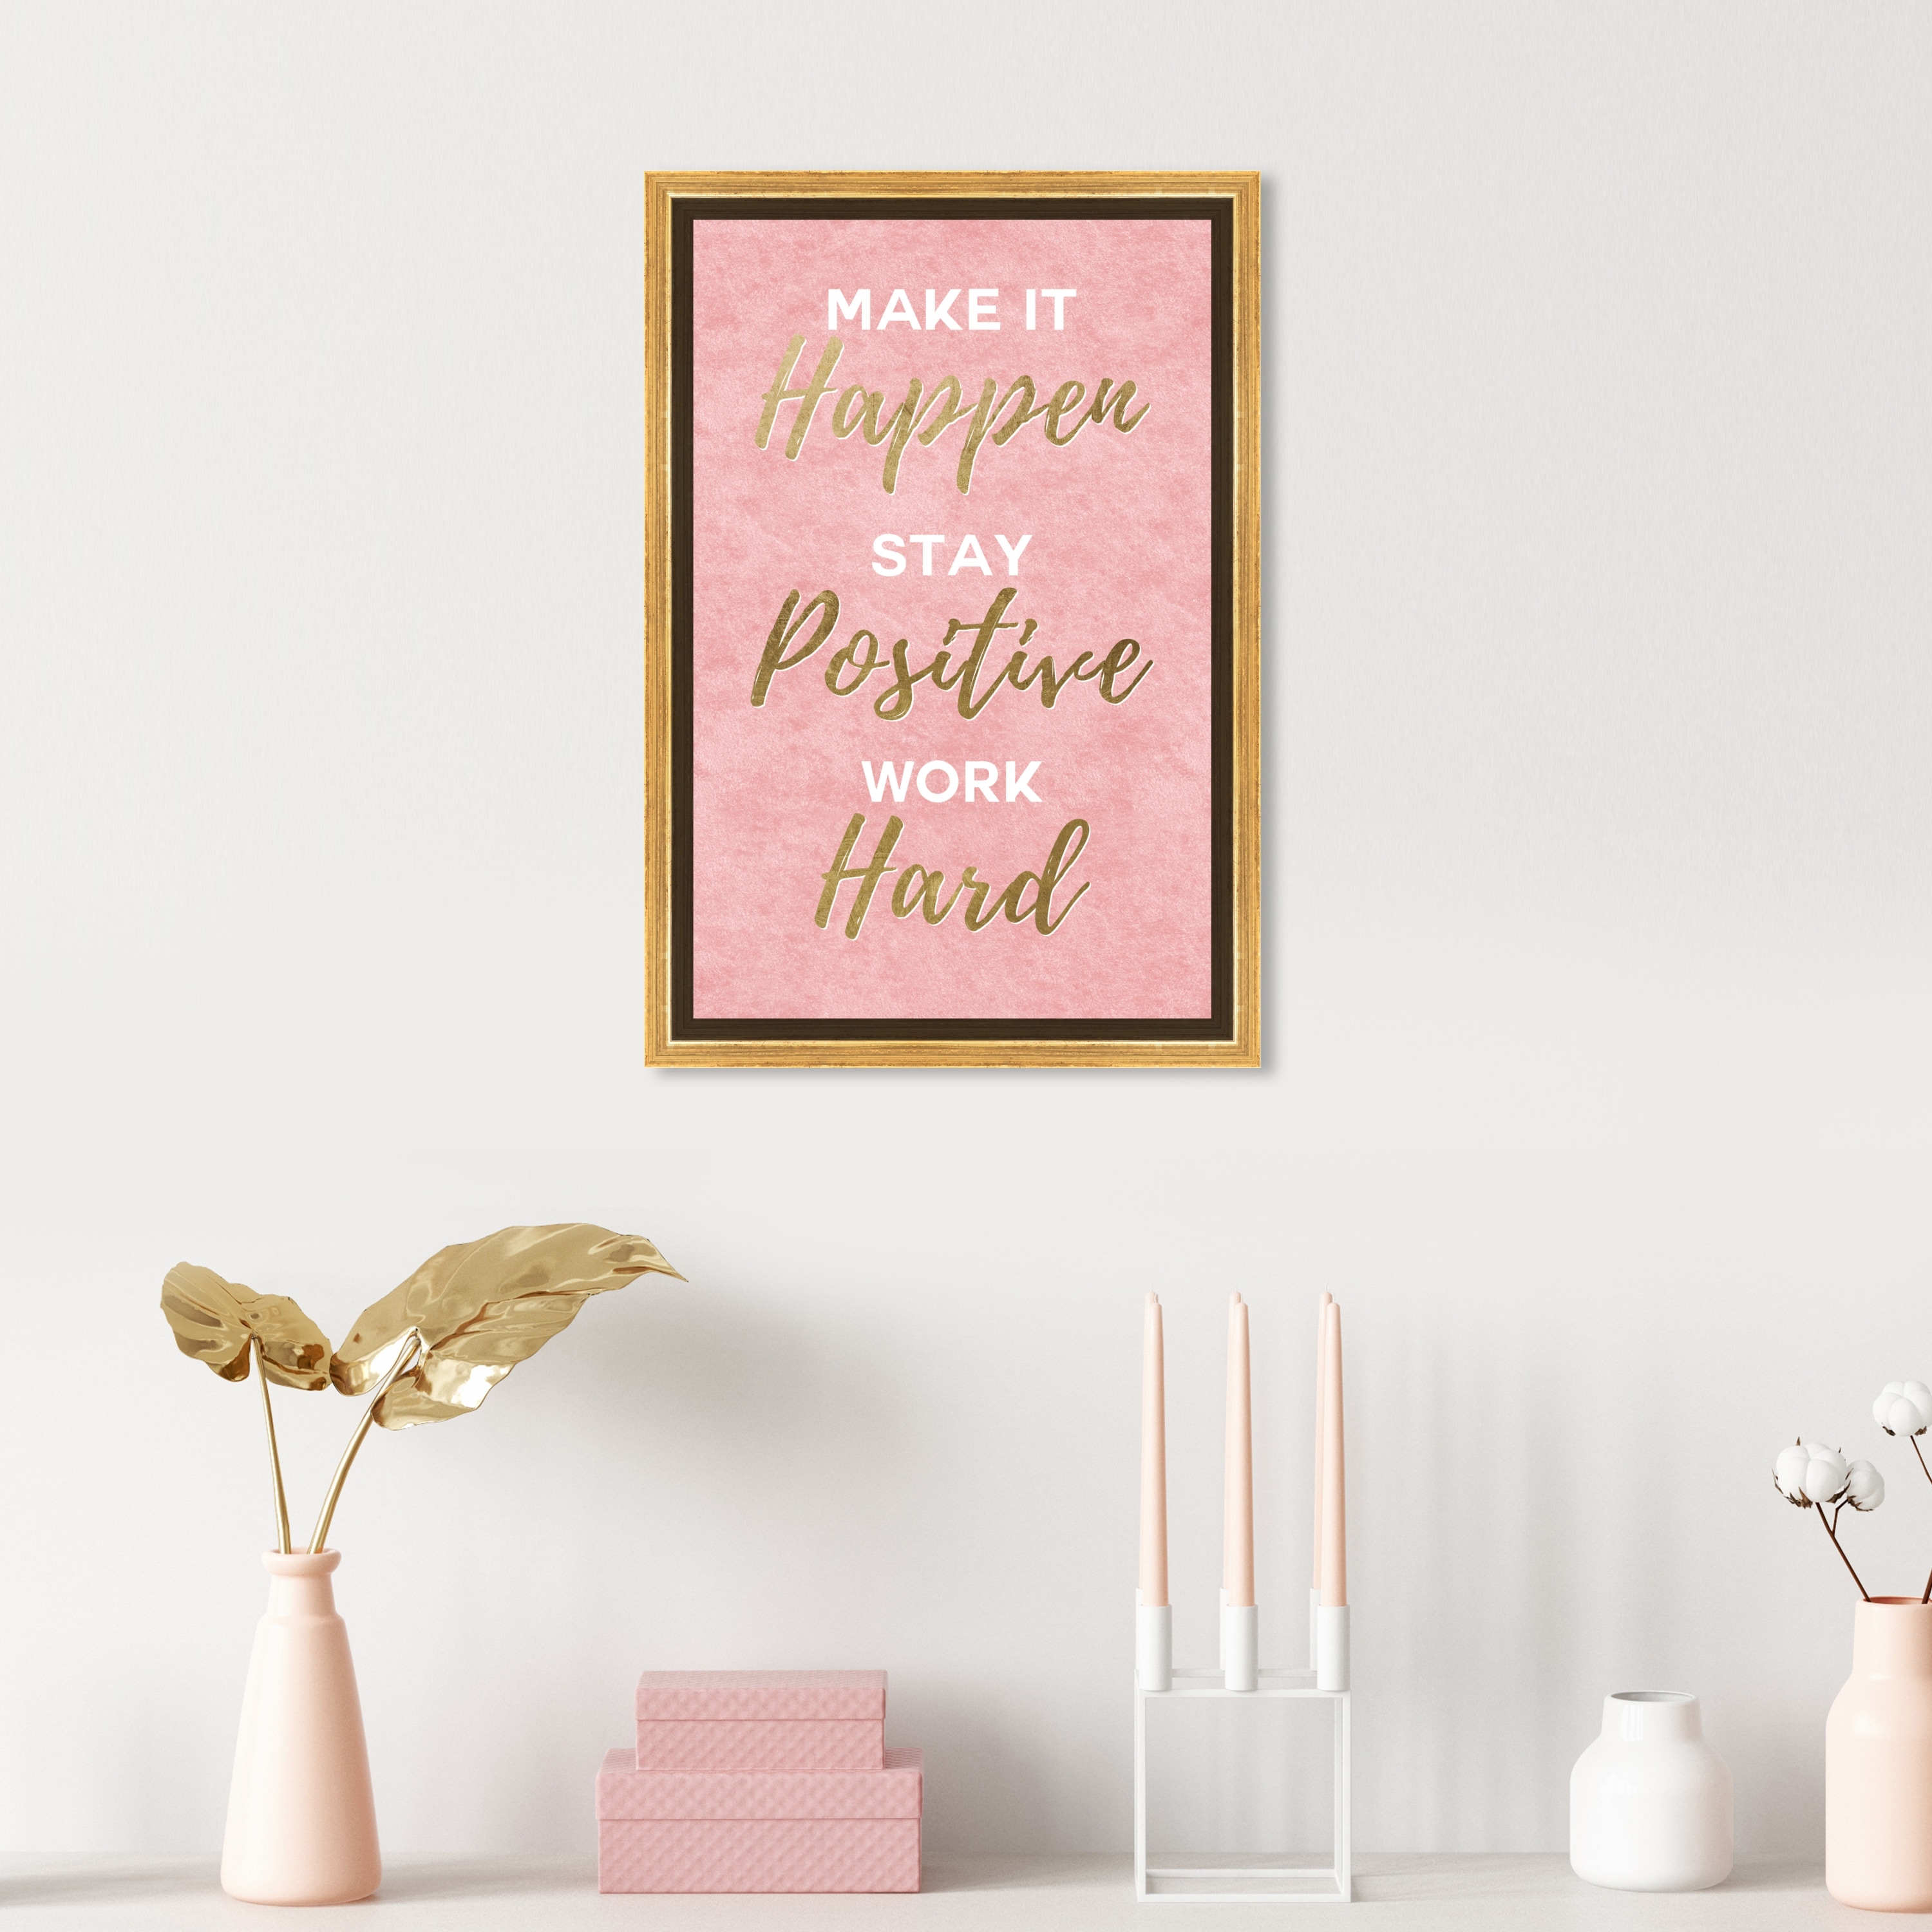 Sayings - - - Quotes Sale Gal Bath Gold Wall Typography On - Motivational 32482244 and and Framed Positive\' Canvas Pink, \'Stay Quotes Art Beyond Bed Oliver Print &